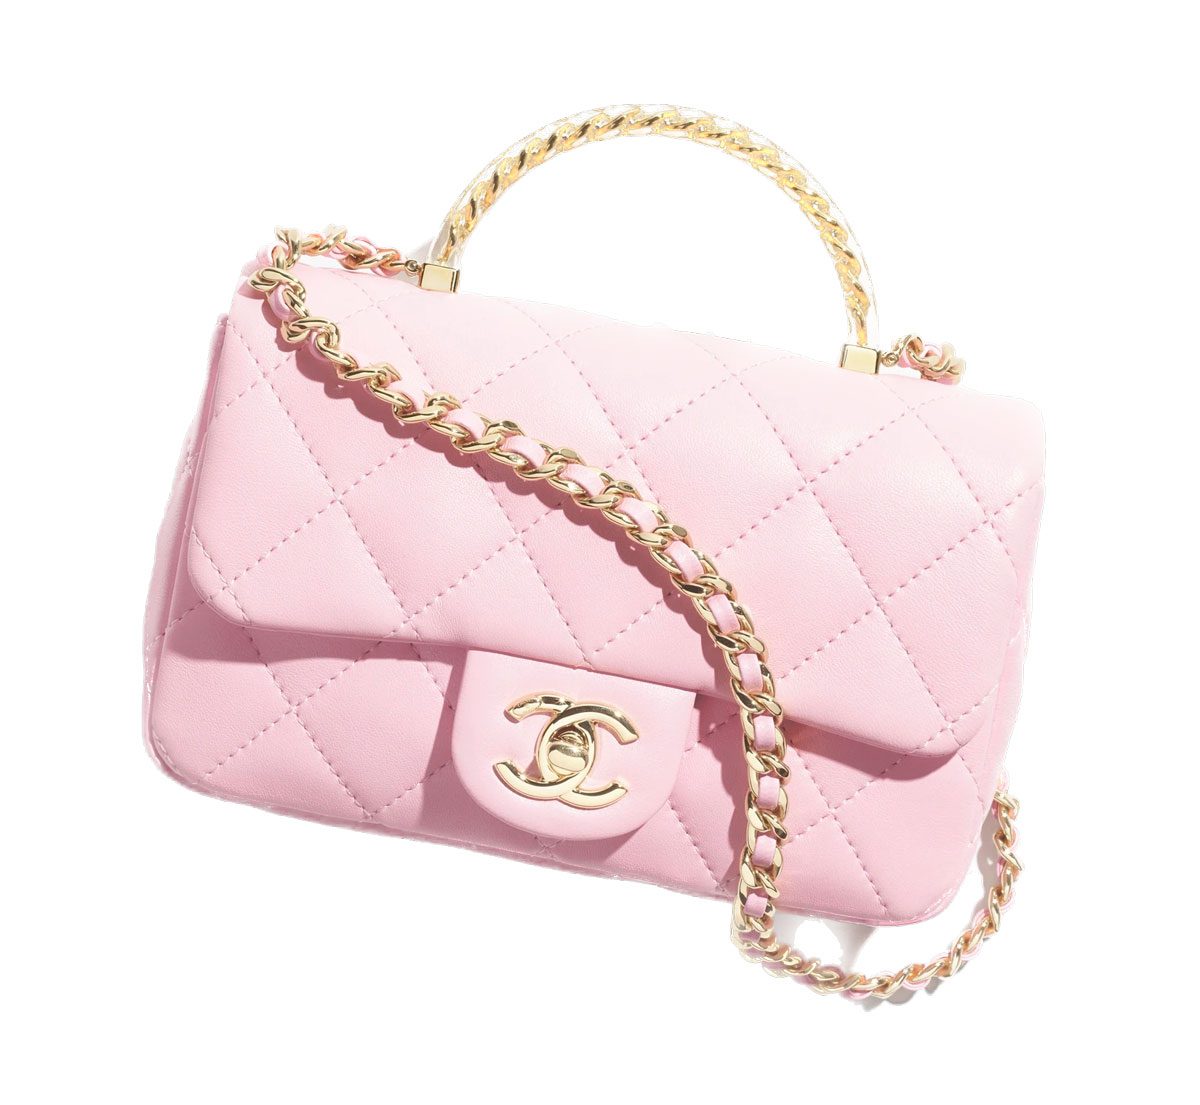 Chanel Mini Flap Bag with Top Handle Background Removed